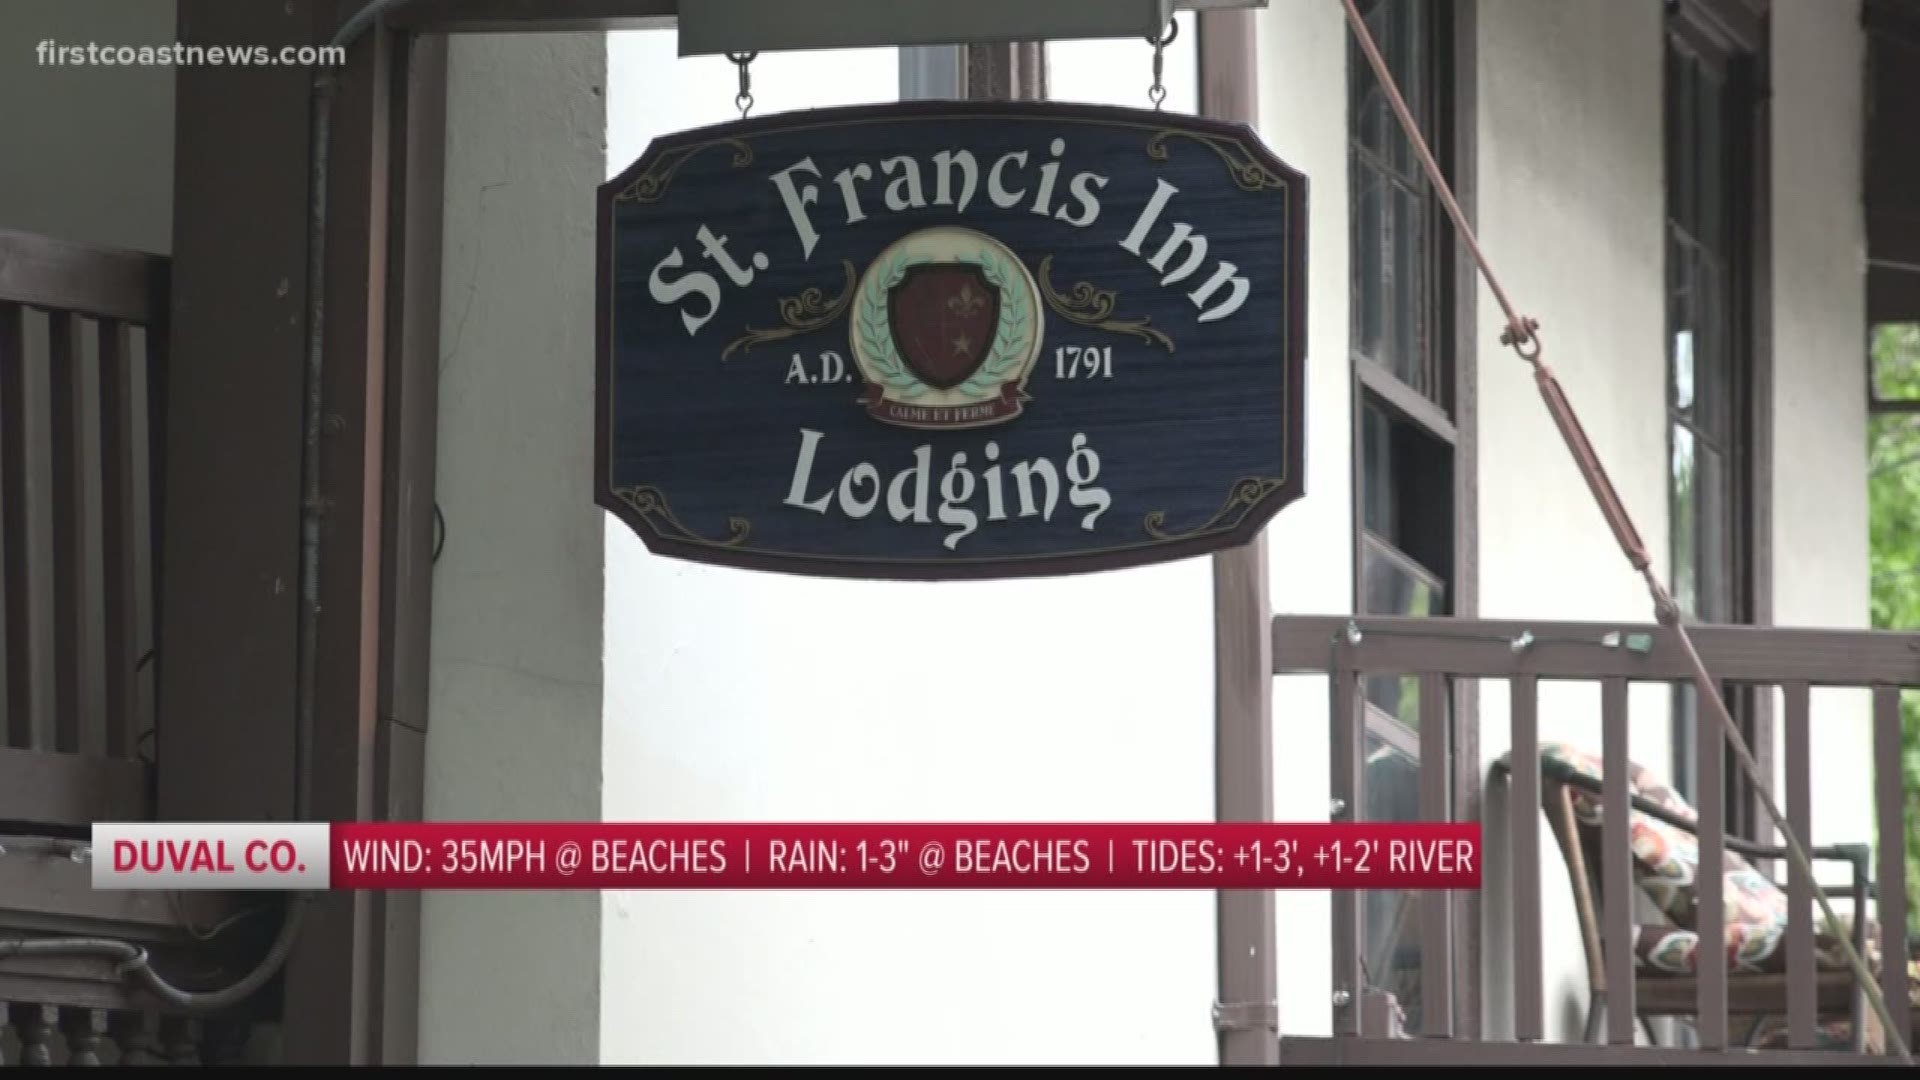 The owner of the St. Francis Inn in St. Augustine was closed for eight days... and it took a toll.